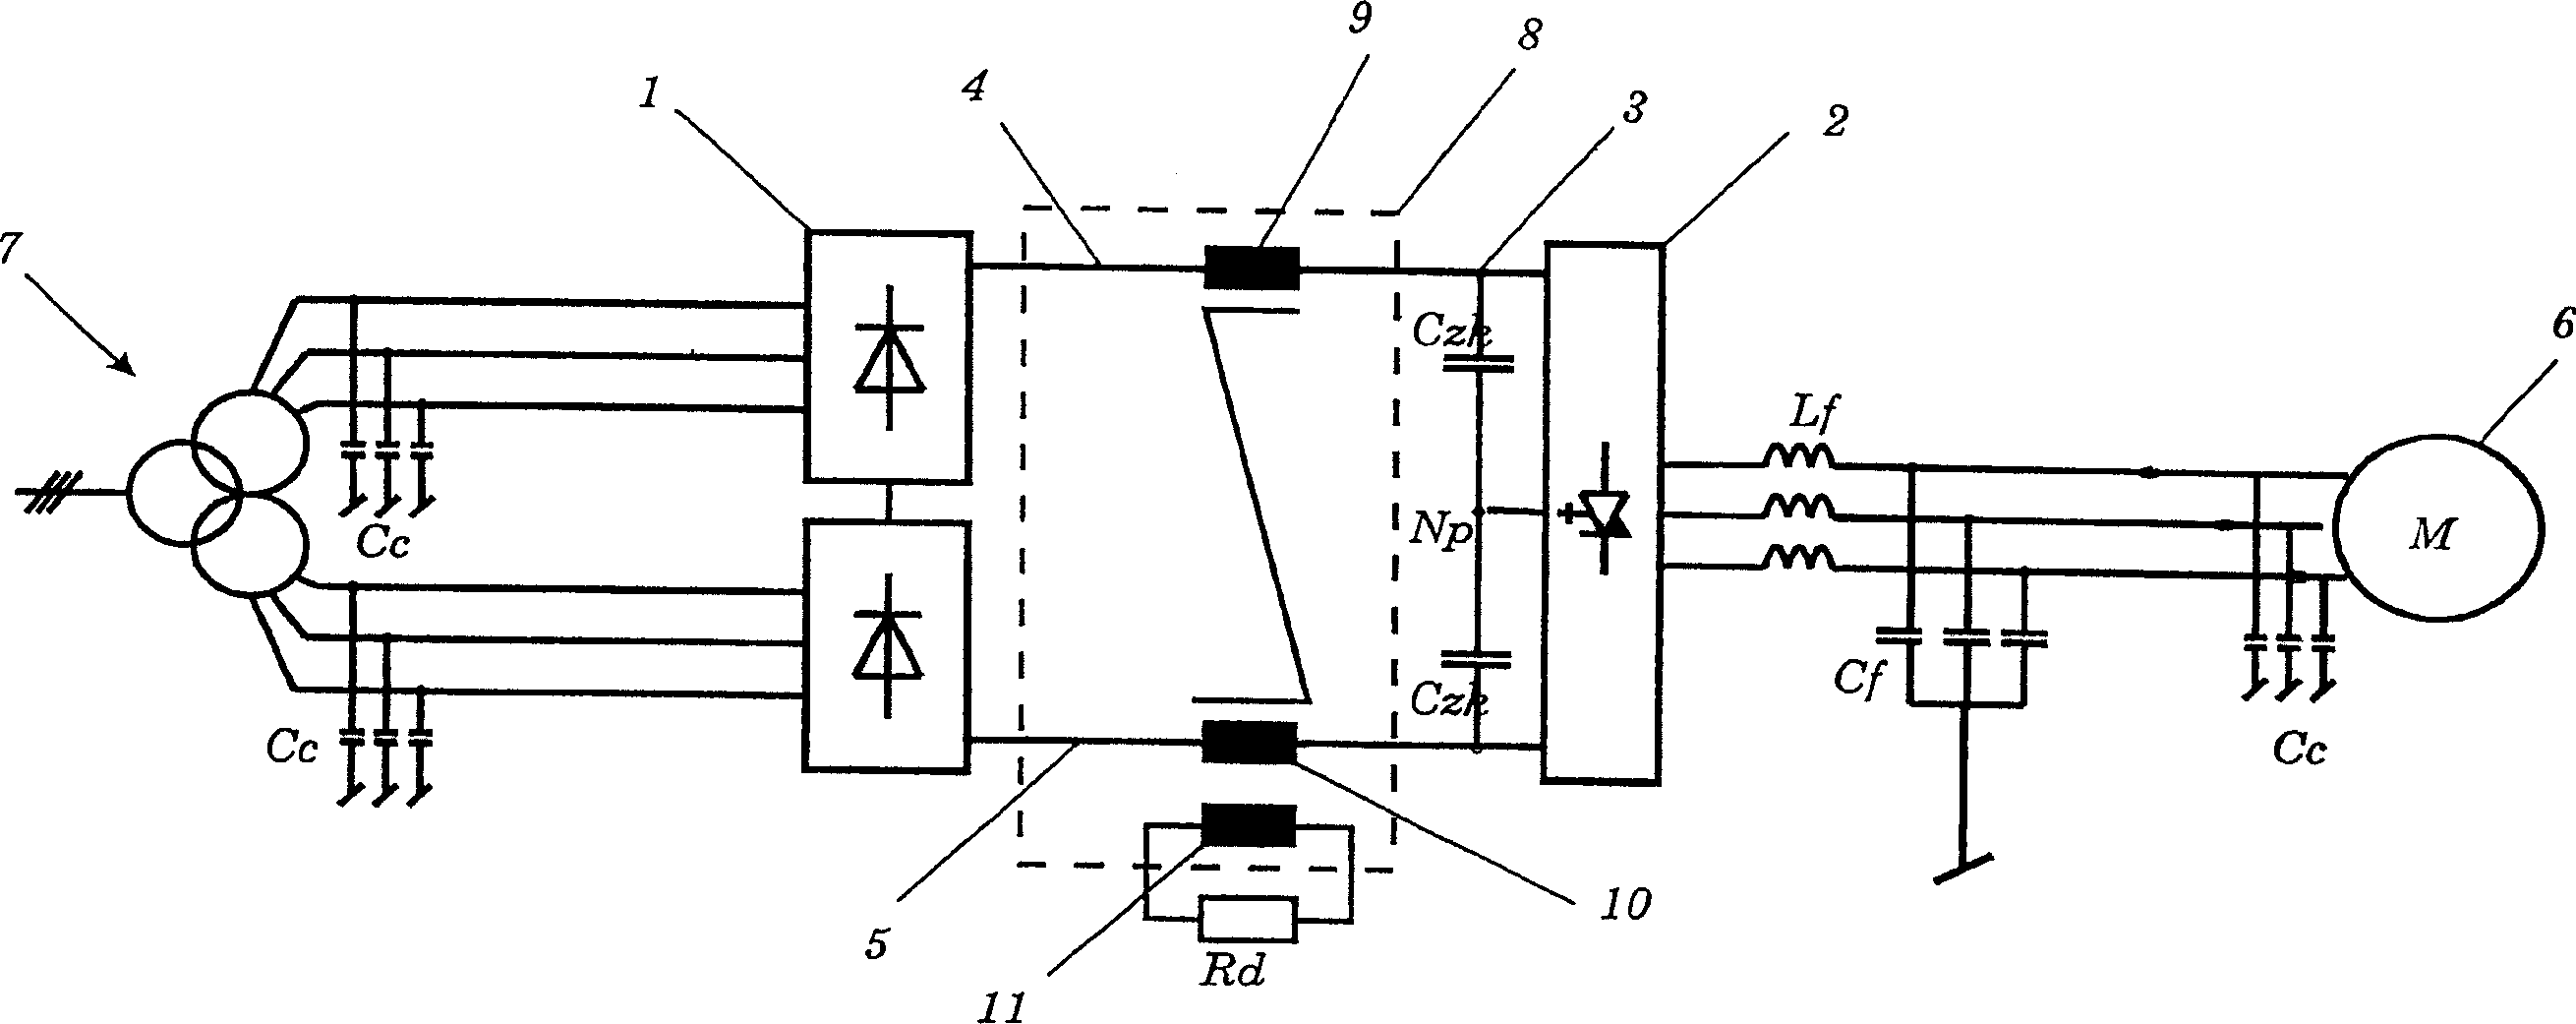 Converter circuit structure with direct voltage intermediate circuit